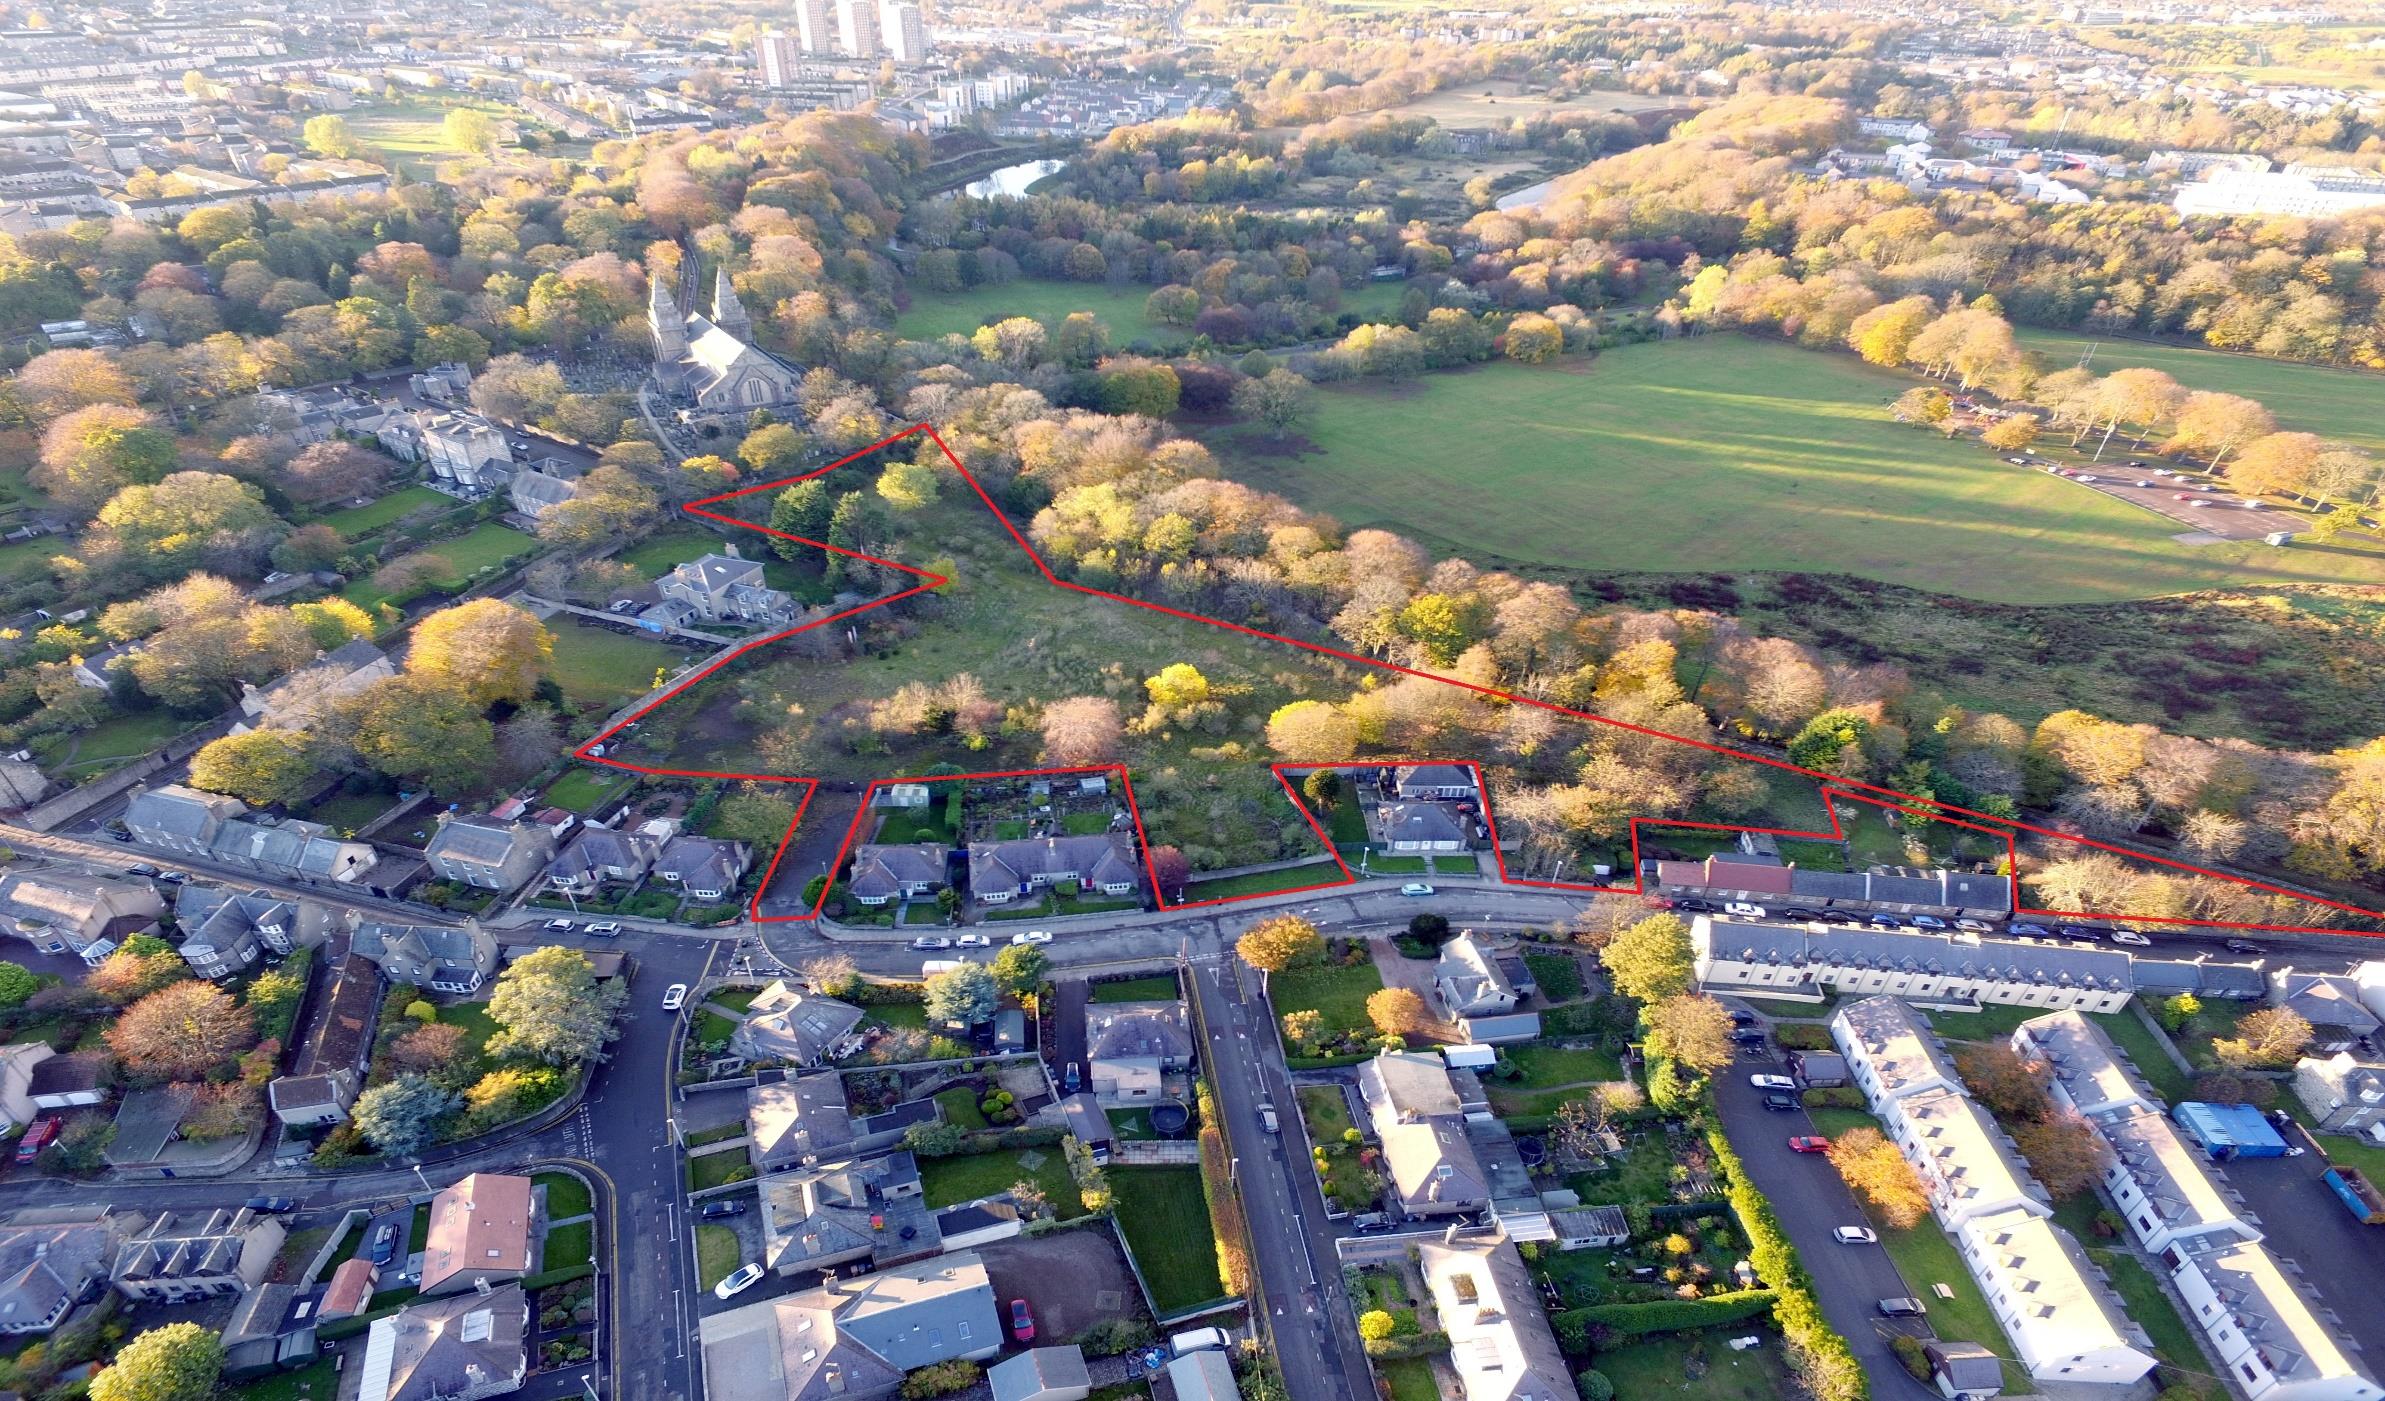 A four-acre site in Old Aberdeen has been placed on the market